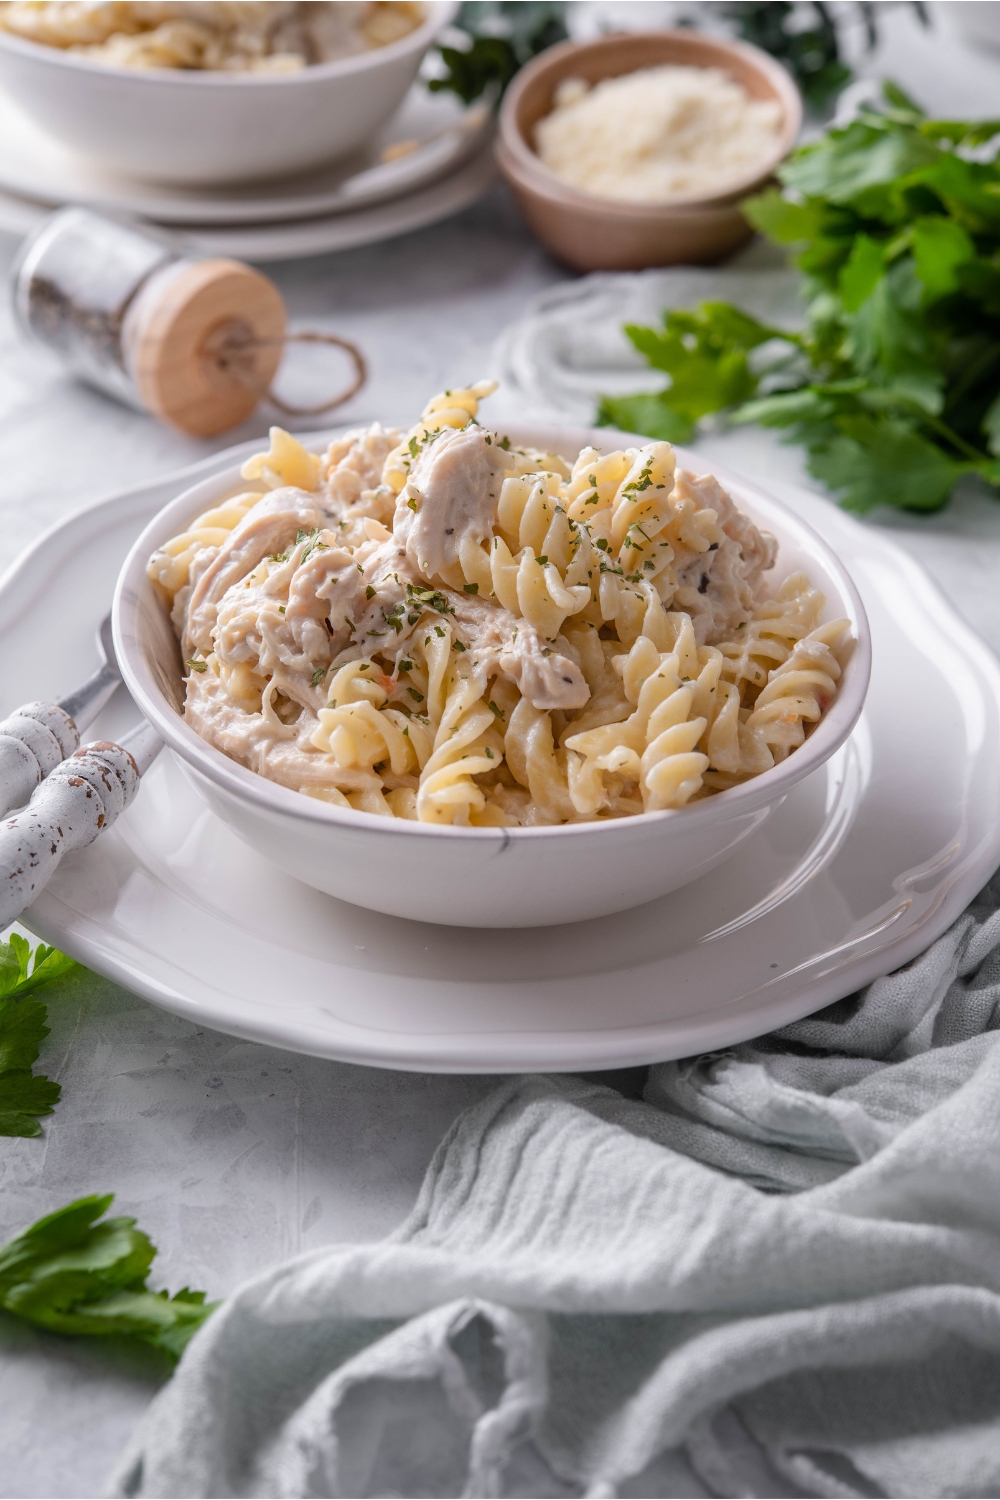 A bowl of pasta and chicken in a cream sauce atop a white plate with two forks next to the bowl.